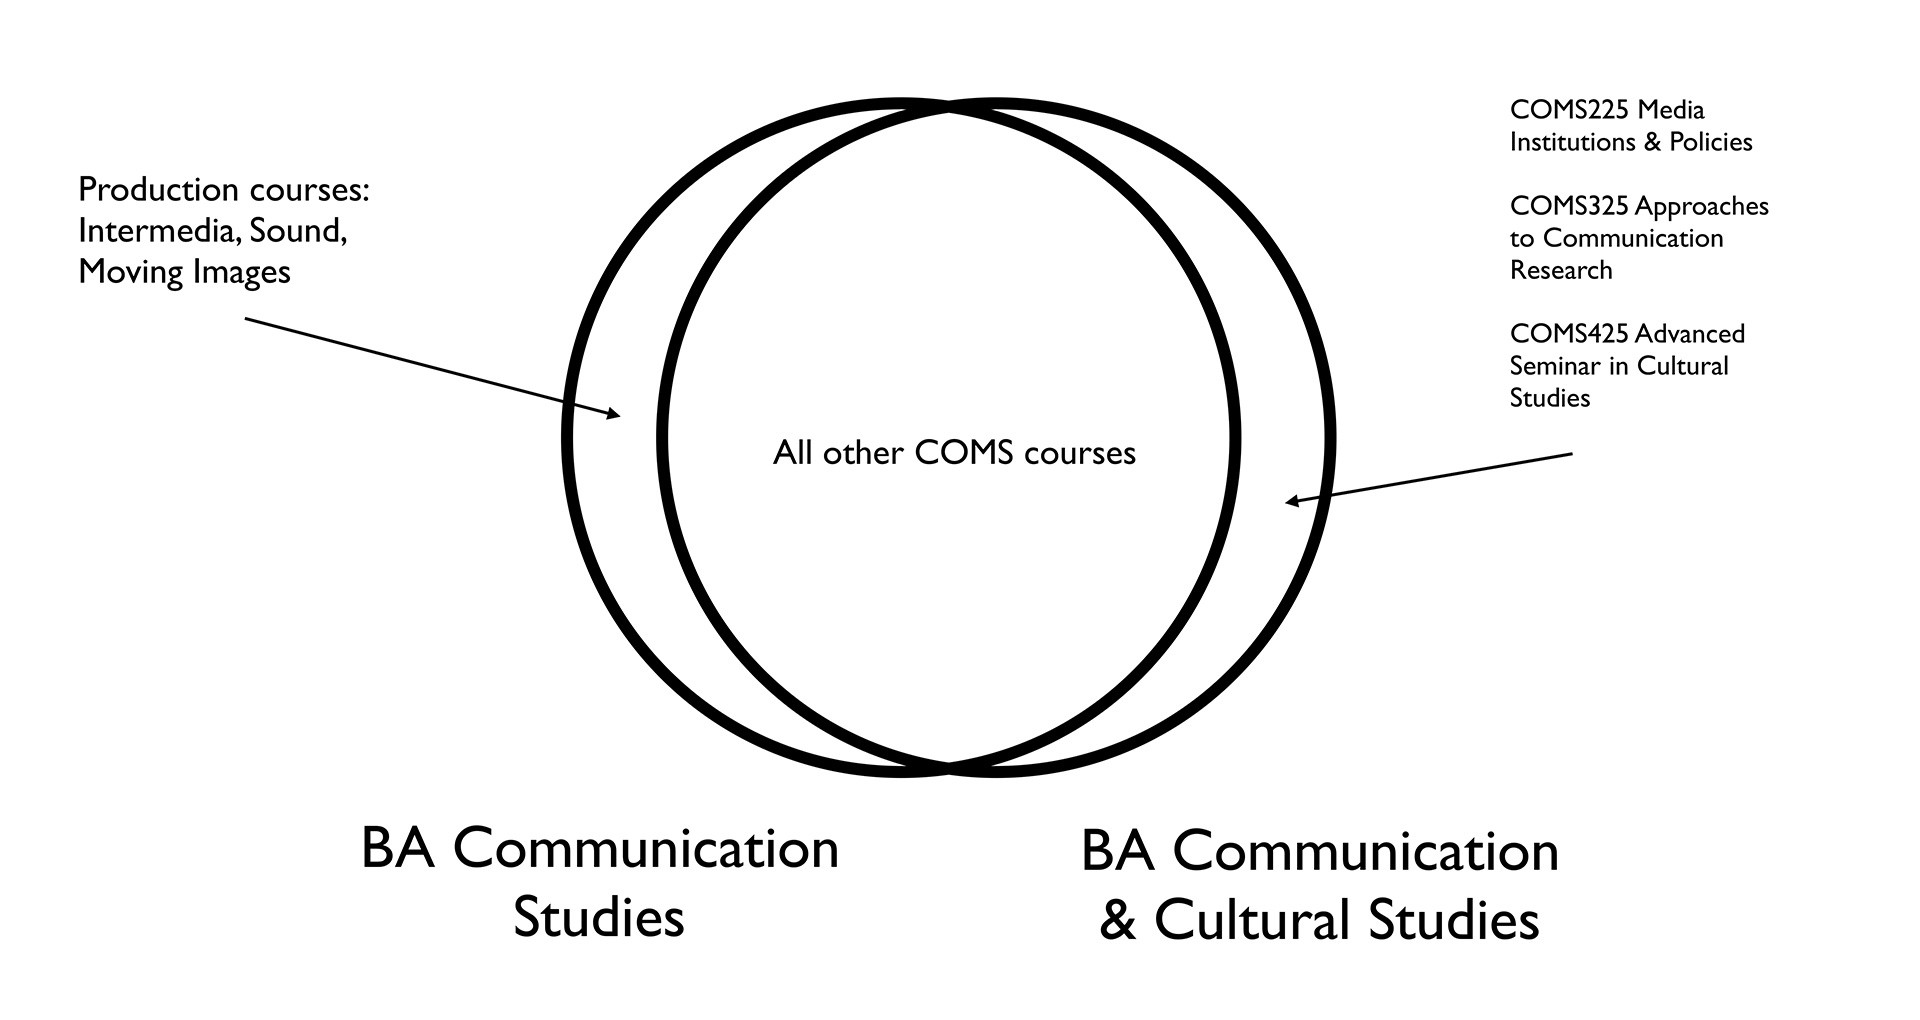 A Venn diagram depicting the intersection of two sets: BA Communication Studies (Circle 1) and BA Communications & Cultural Studies (Circle 2). Circle 1 includes production courses in intermedia, sound, and moving images. Circle 2 includes courses such as COMS225 Media Institutions & Policies, COMS325 Approaches to Communication Research, and COMS425 Advanced Seminar in Cultural Studies. The overlapping region represents all other COMS courses shared between both programs.